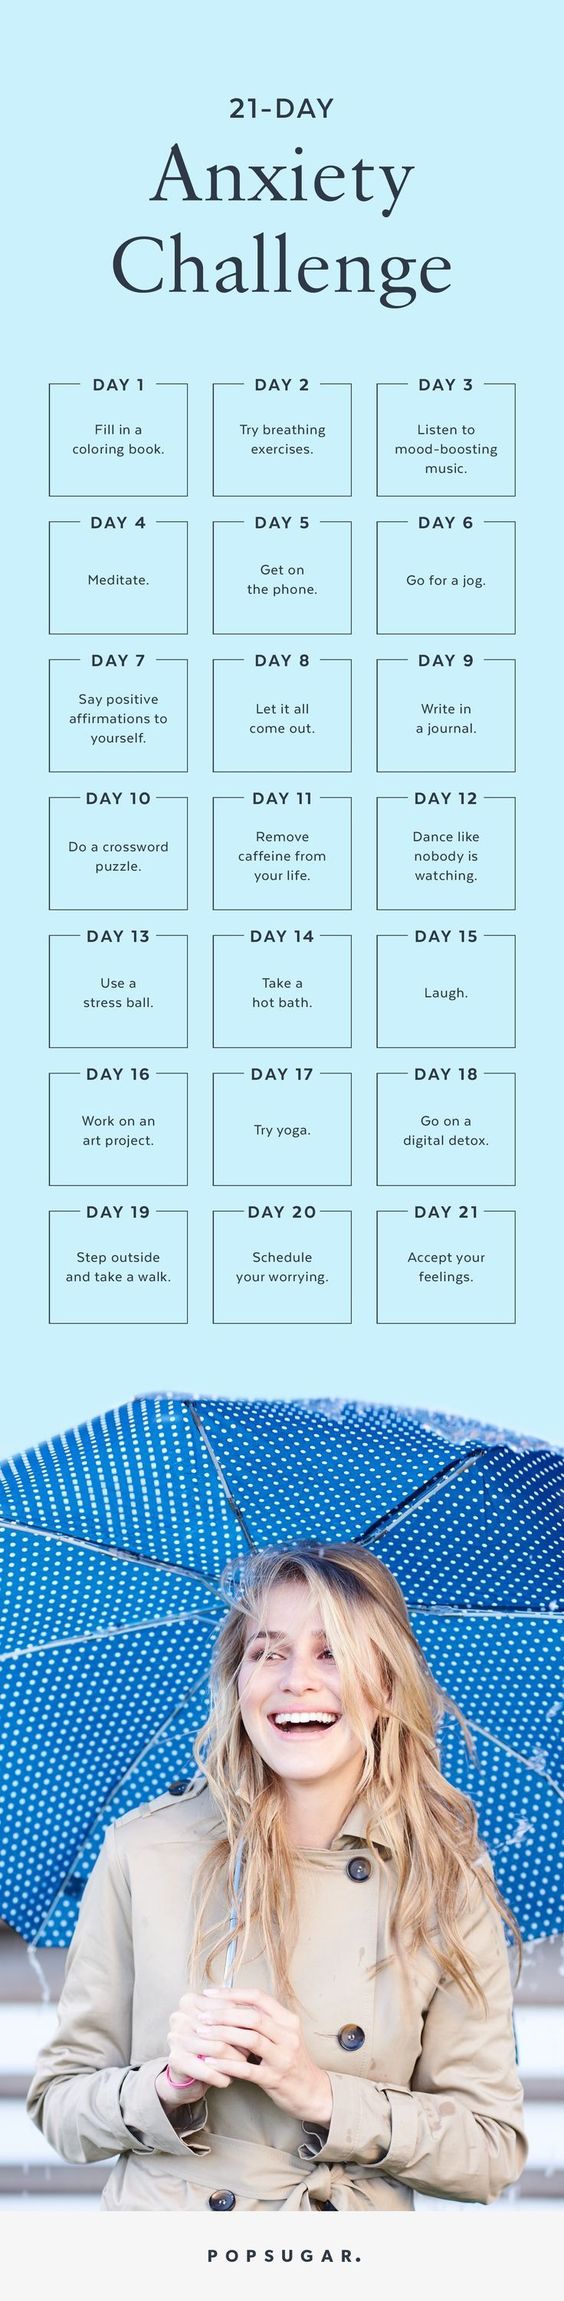  The 21-Day Anxiety Challenge Take Control of Your Nerves 